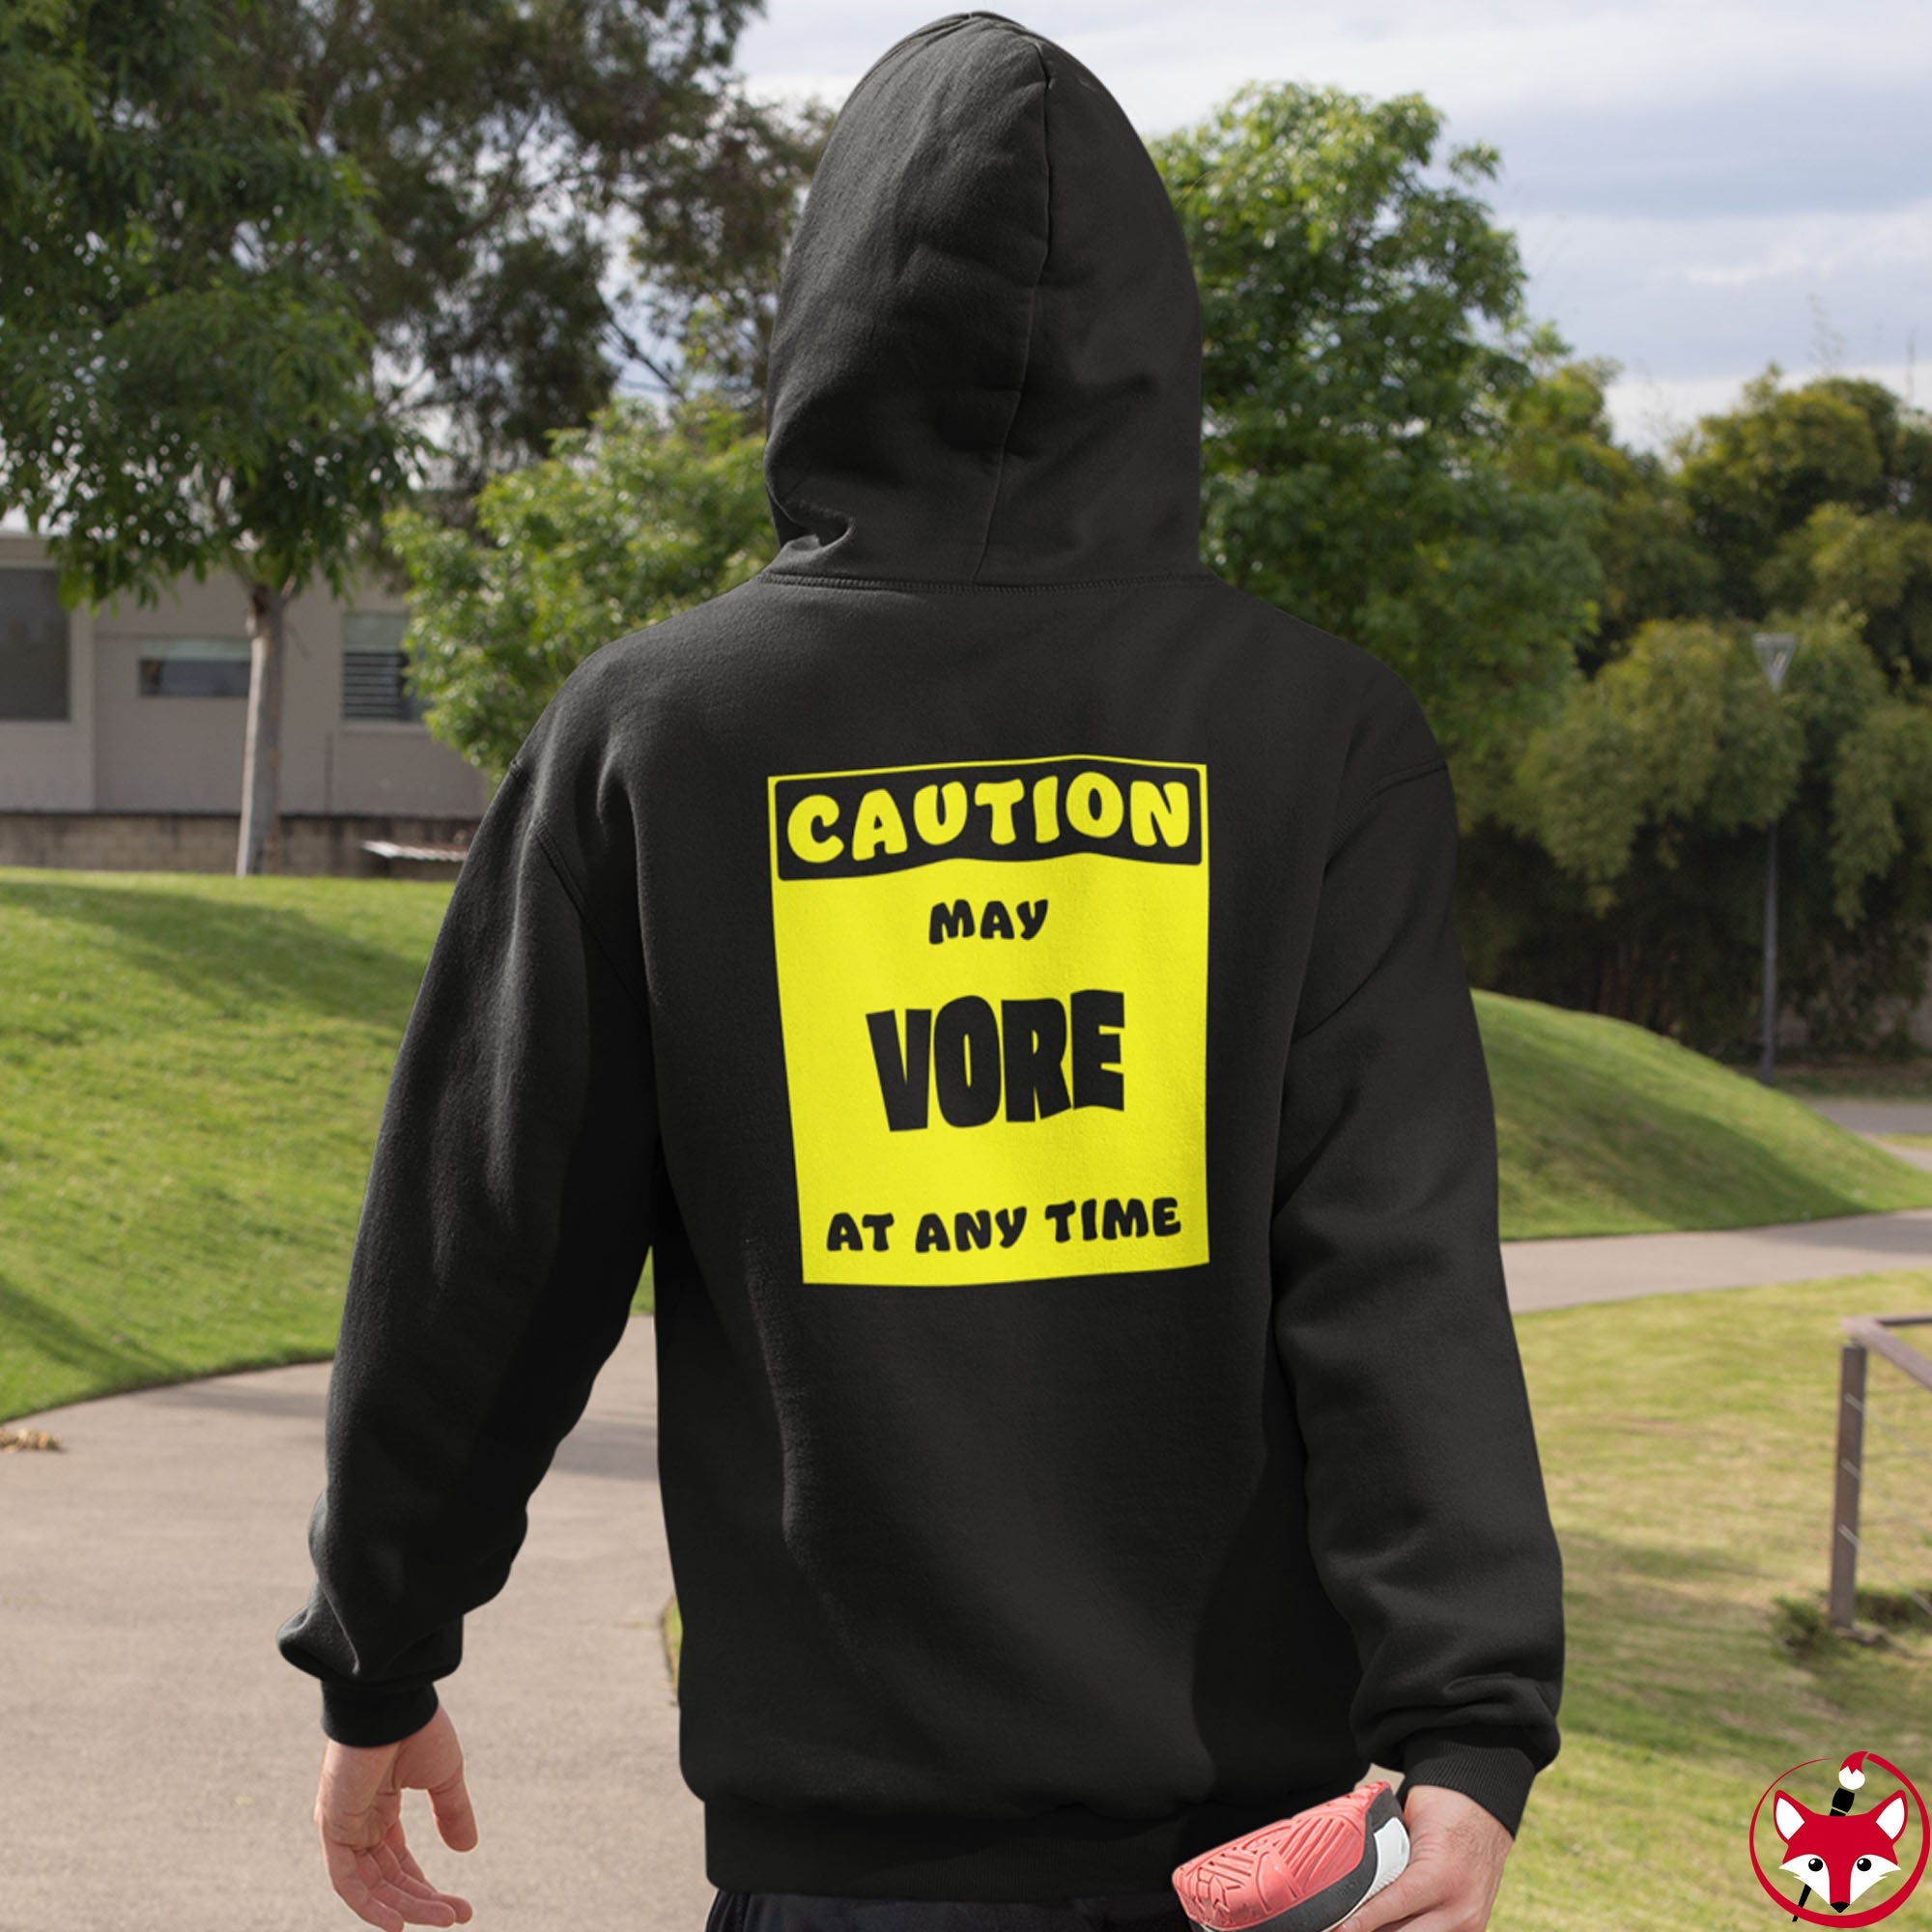 CAUTION! May VORE at any time! - Hoodie Hoodie AFLT-Whootorca 